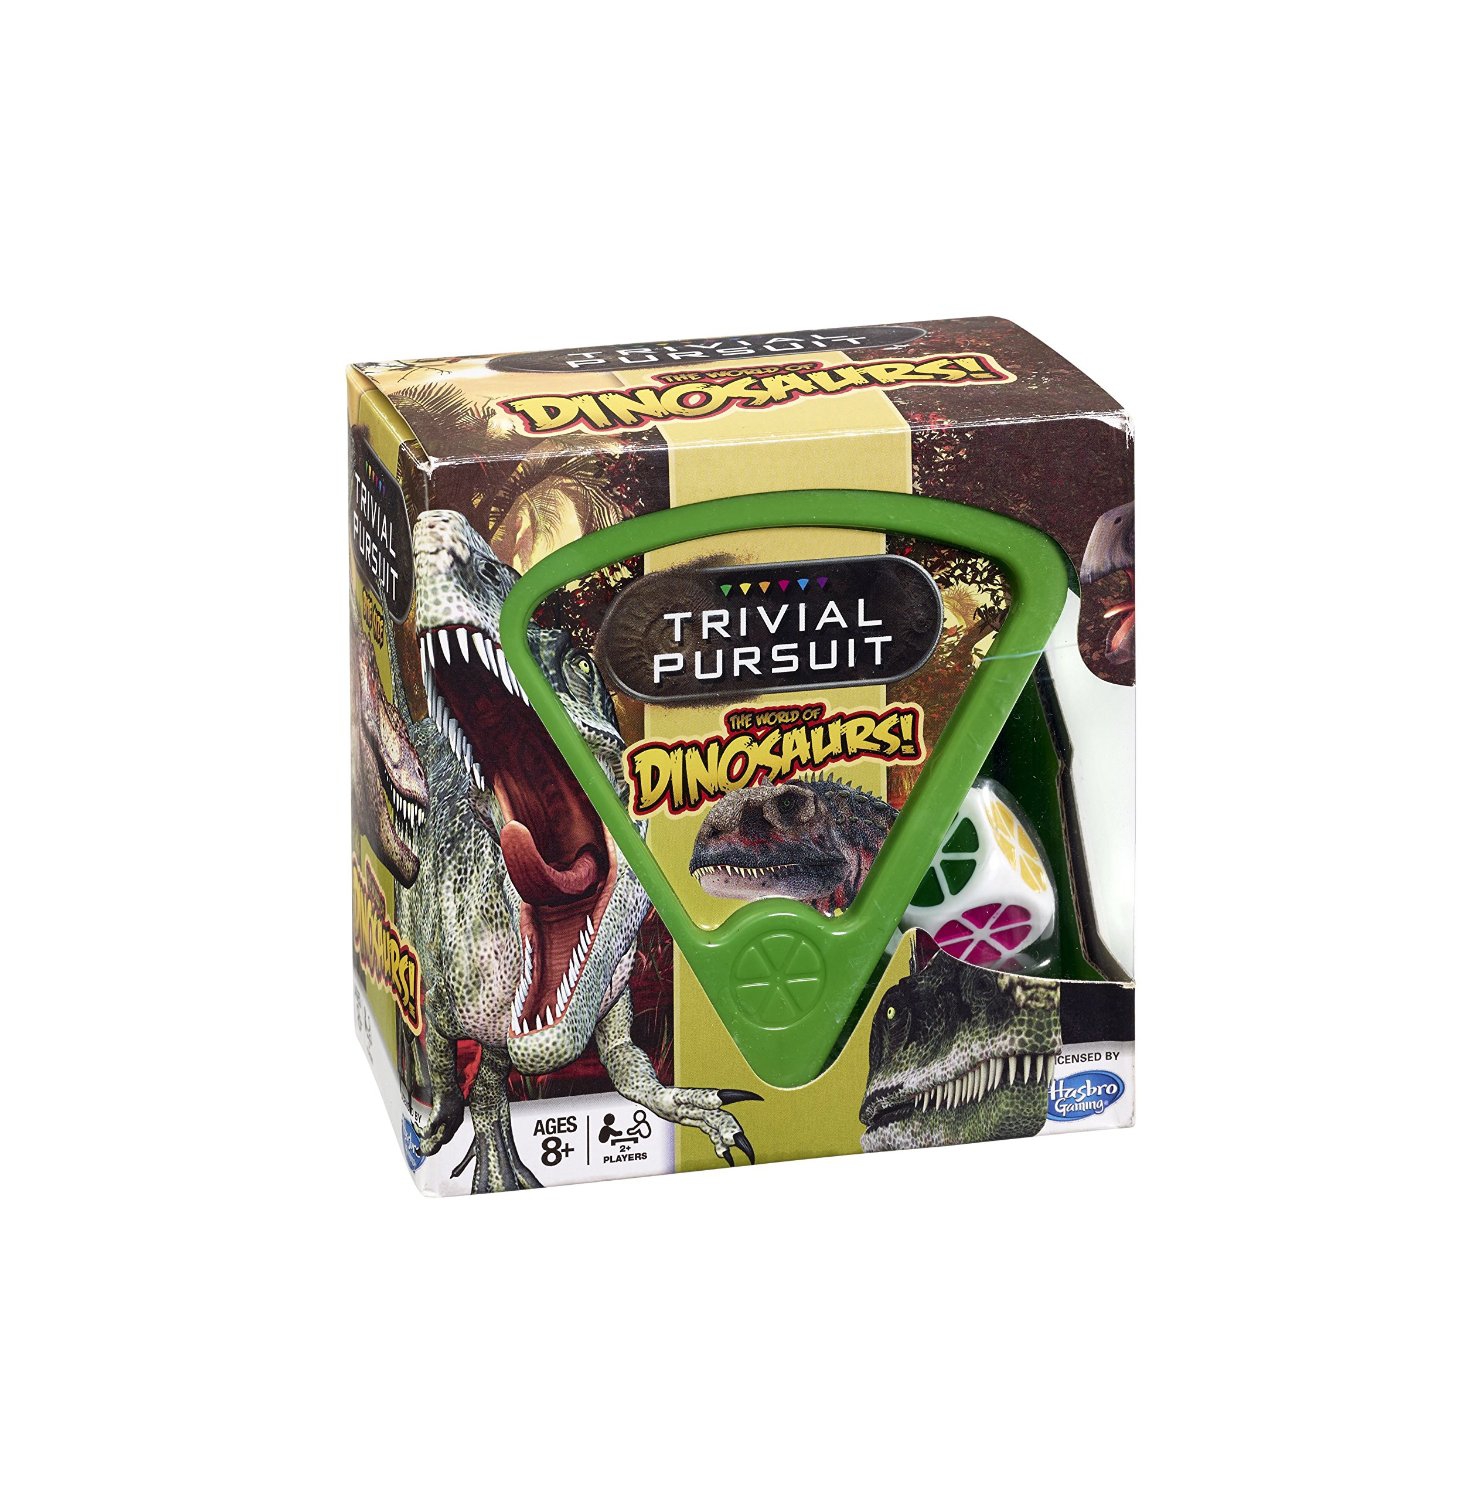 The World of Dinosaurs 'Trivial Pursuit' Card Game